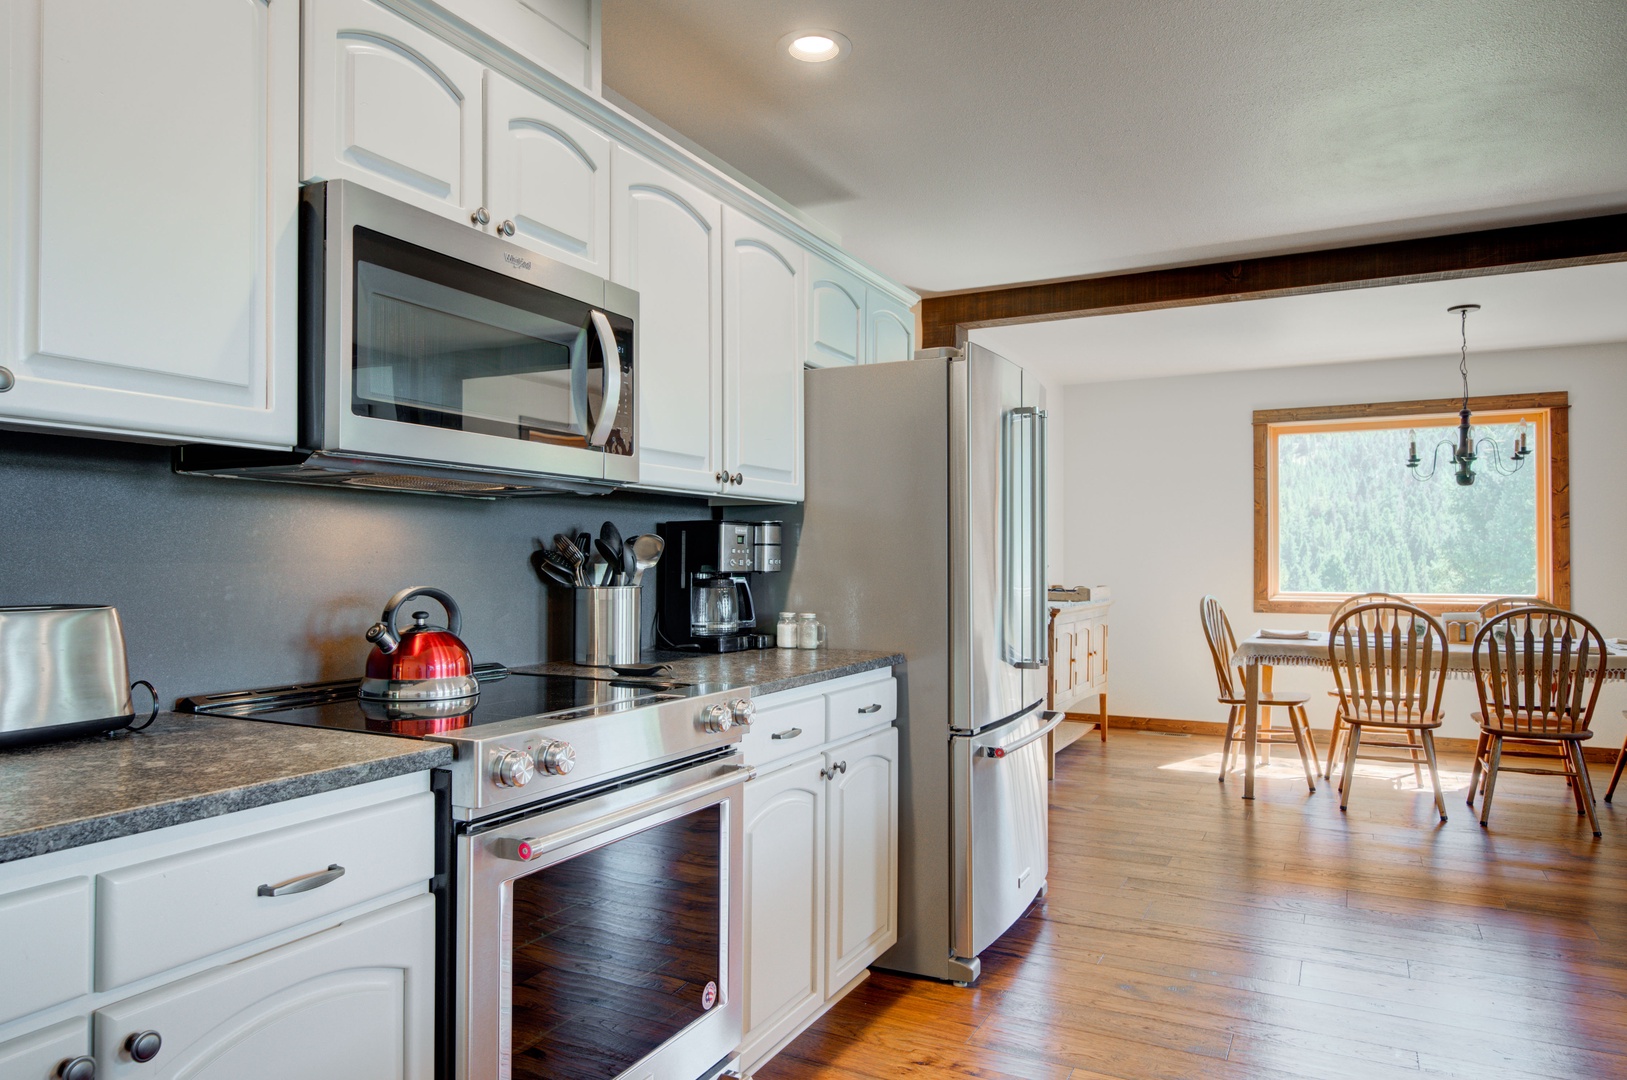 Bozeman Vacation Rentals, The Canyon Lookout - Working room for the chef